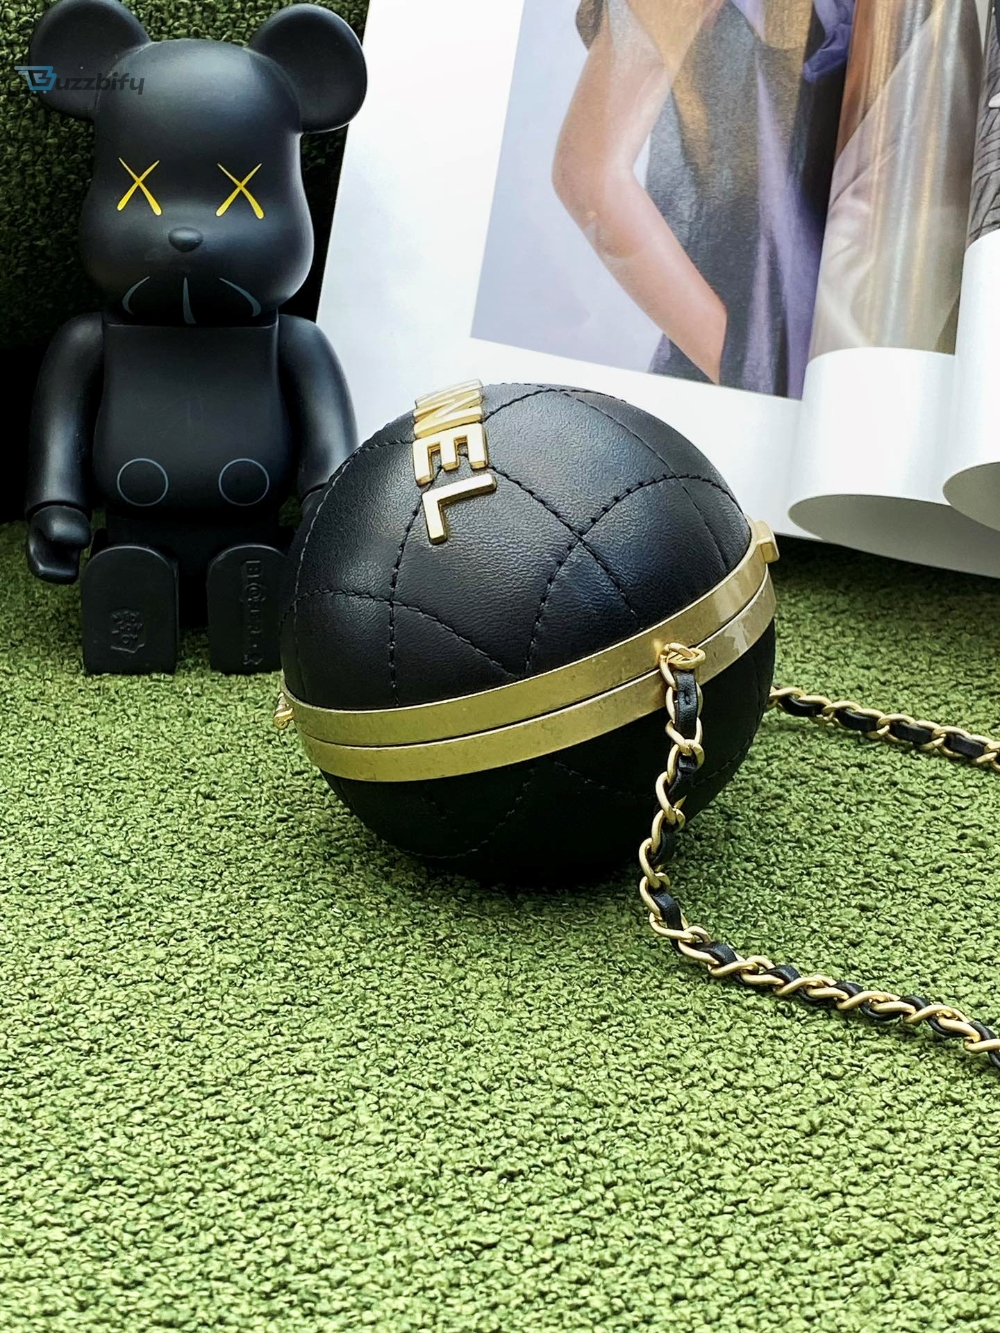 Chanel Ball Bag Black And Gold Chain Bag For Women 8Cm3.15In